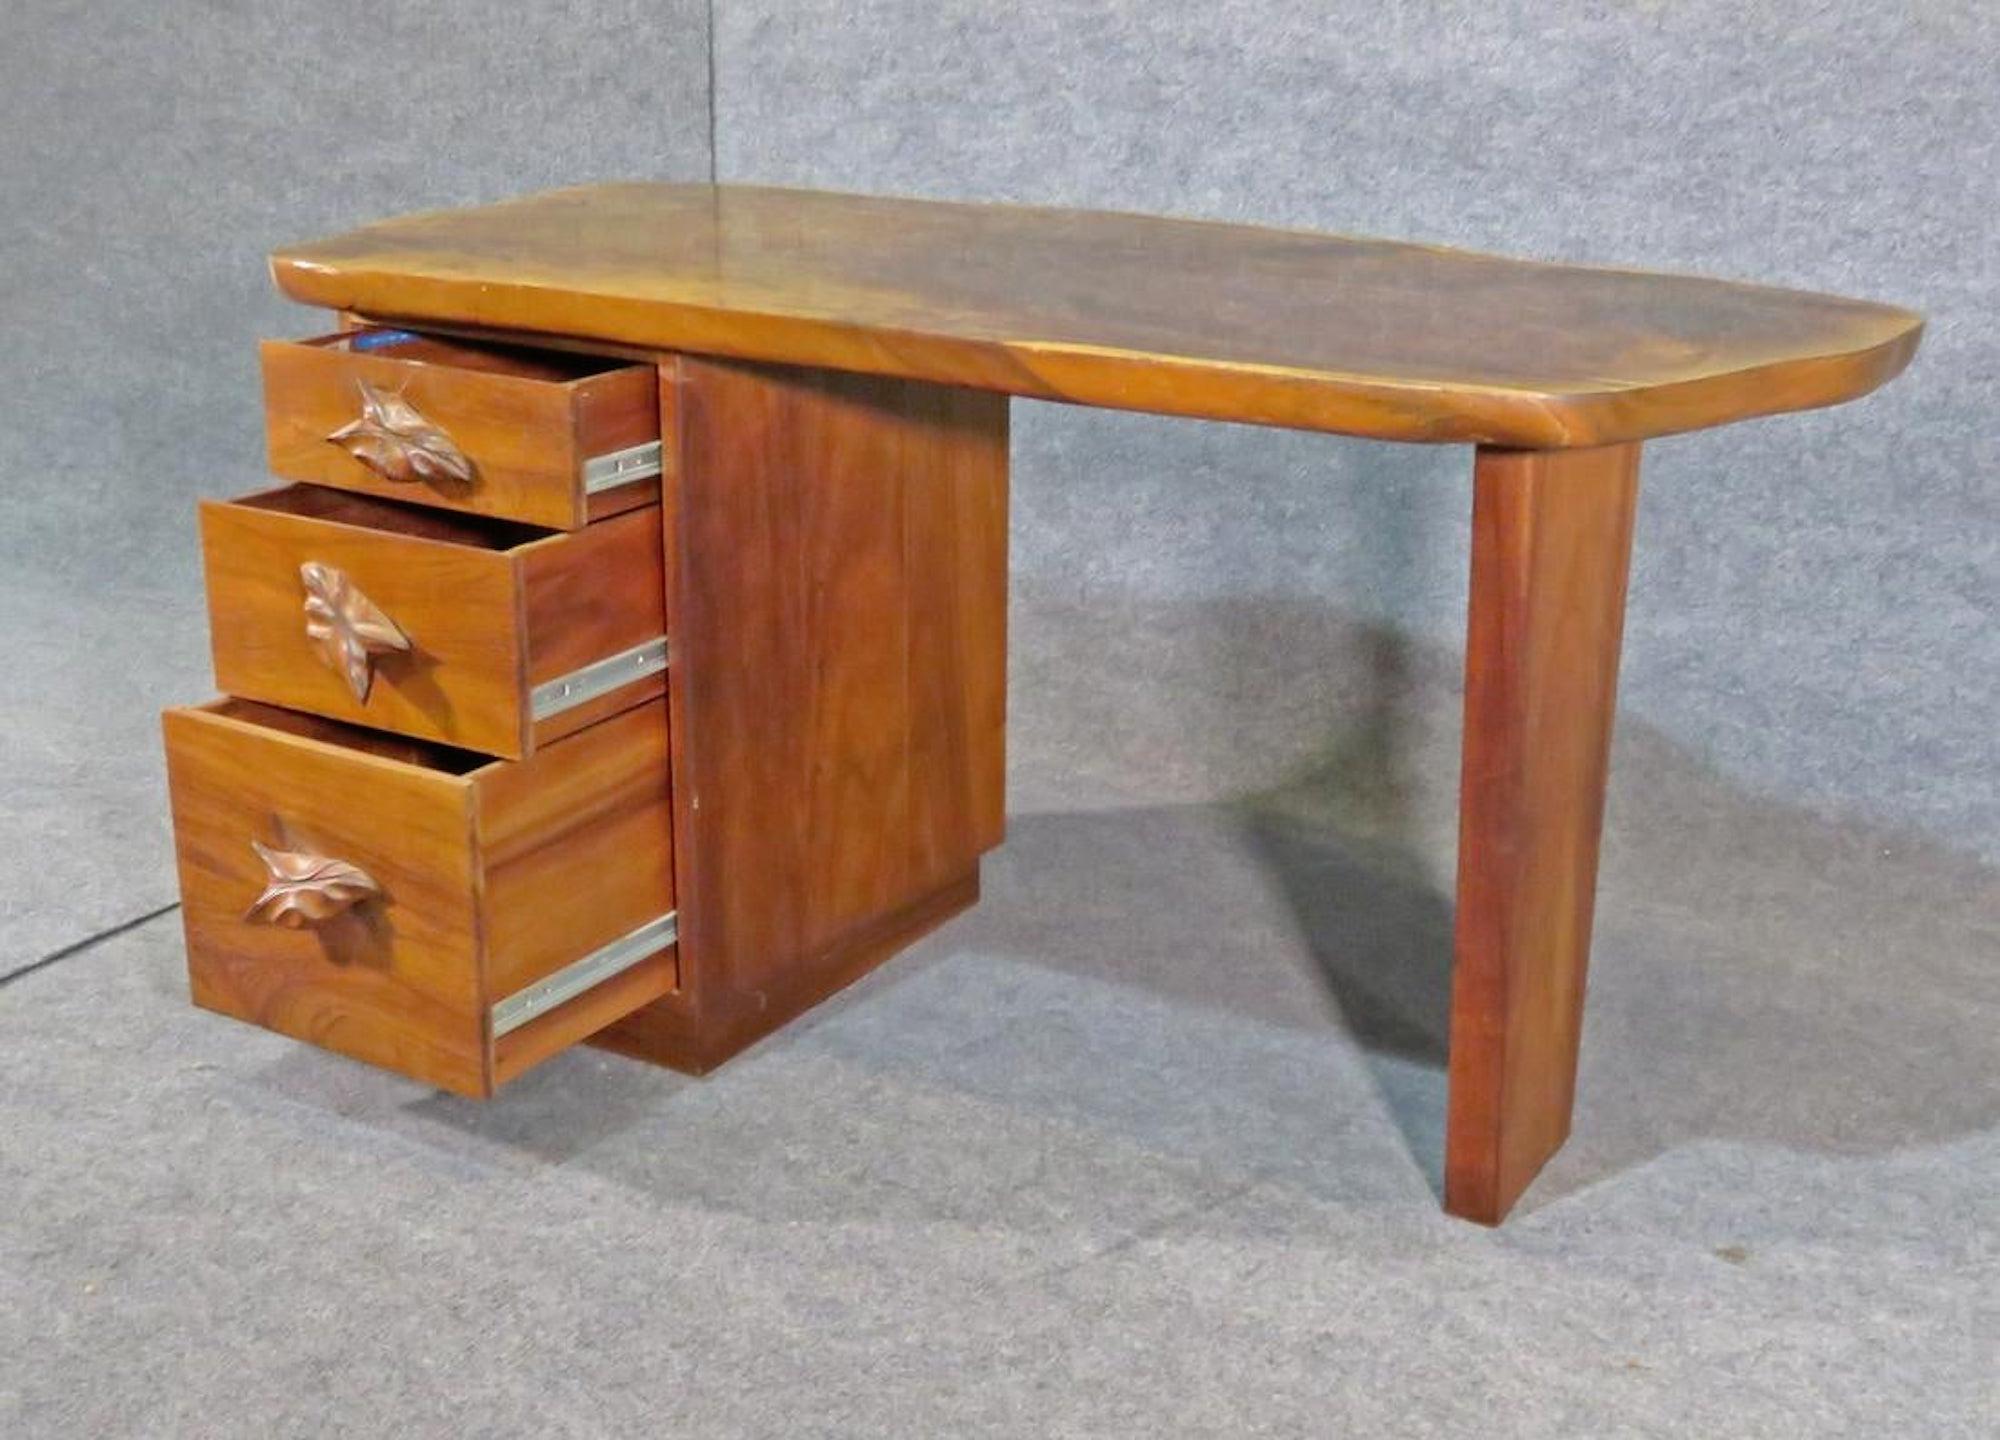 Mid-Century Modern style desk with decorative leaf handles and large tree slab top.
(Please confirm item location - NY or NJ - with dealer).
 